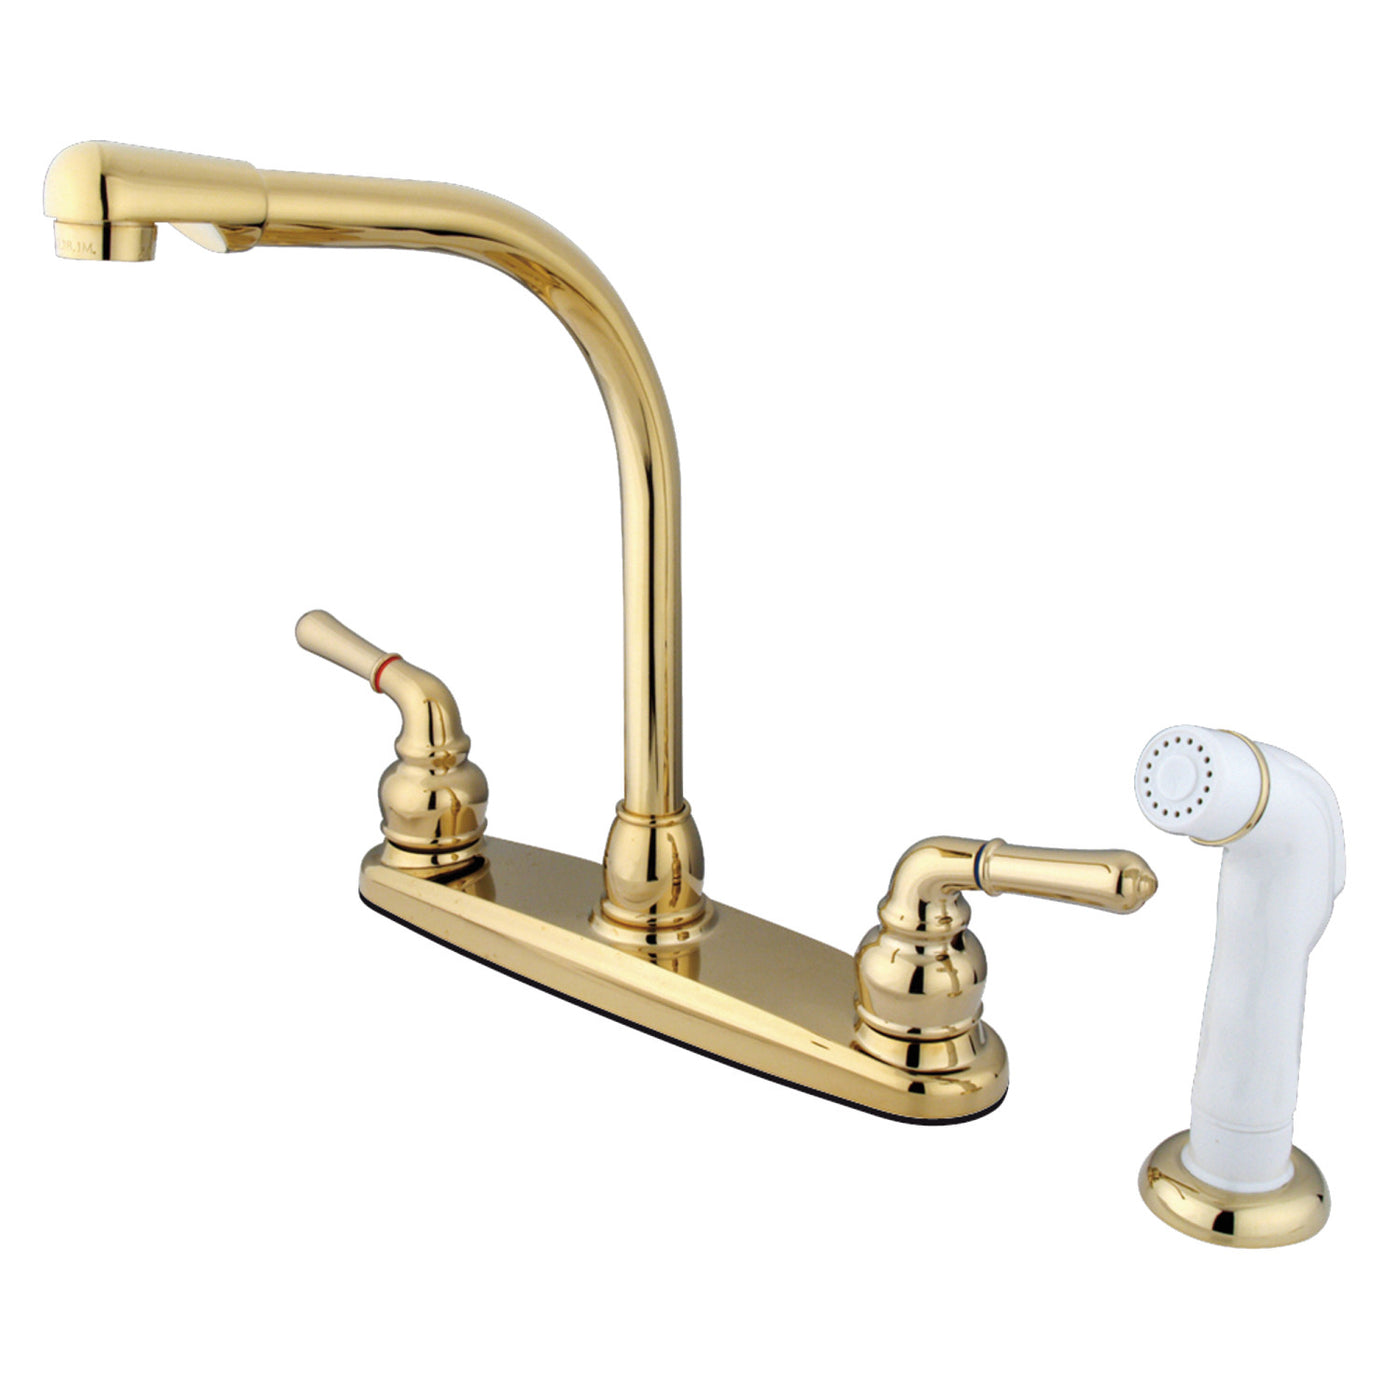 Elements of Design EB752 8-Inch Centerset Kitchen Faucet, Polished Brass